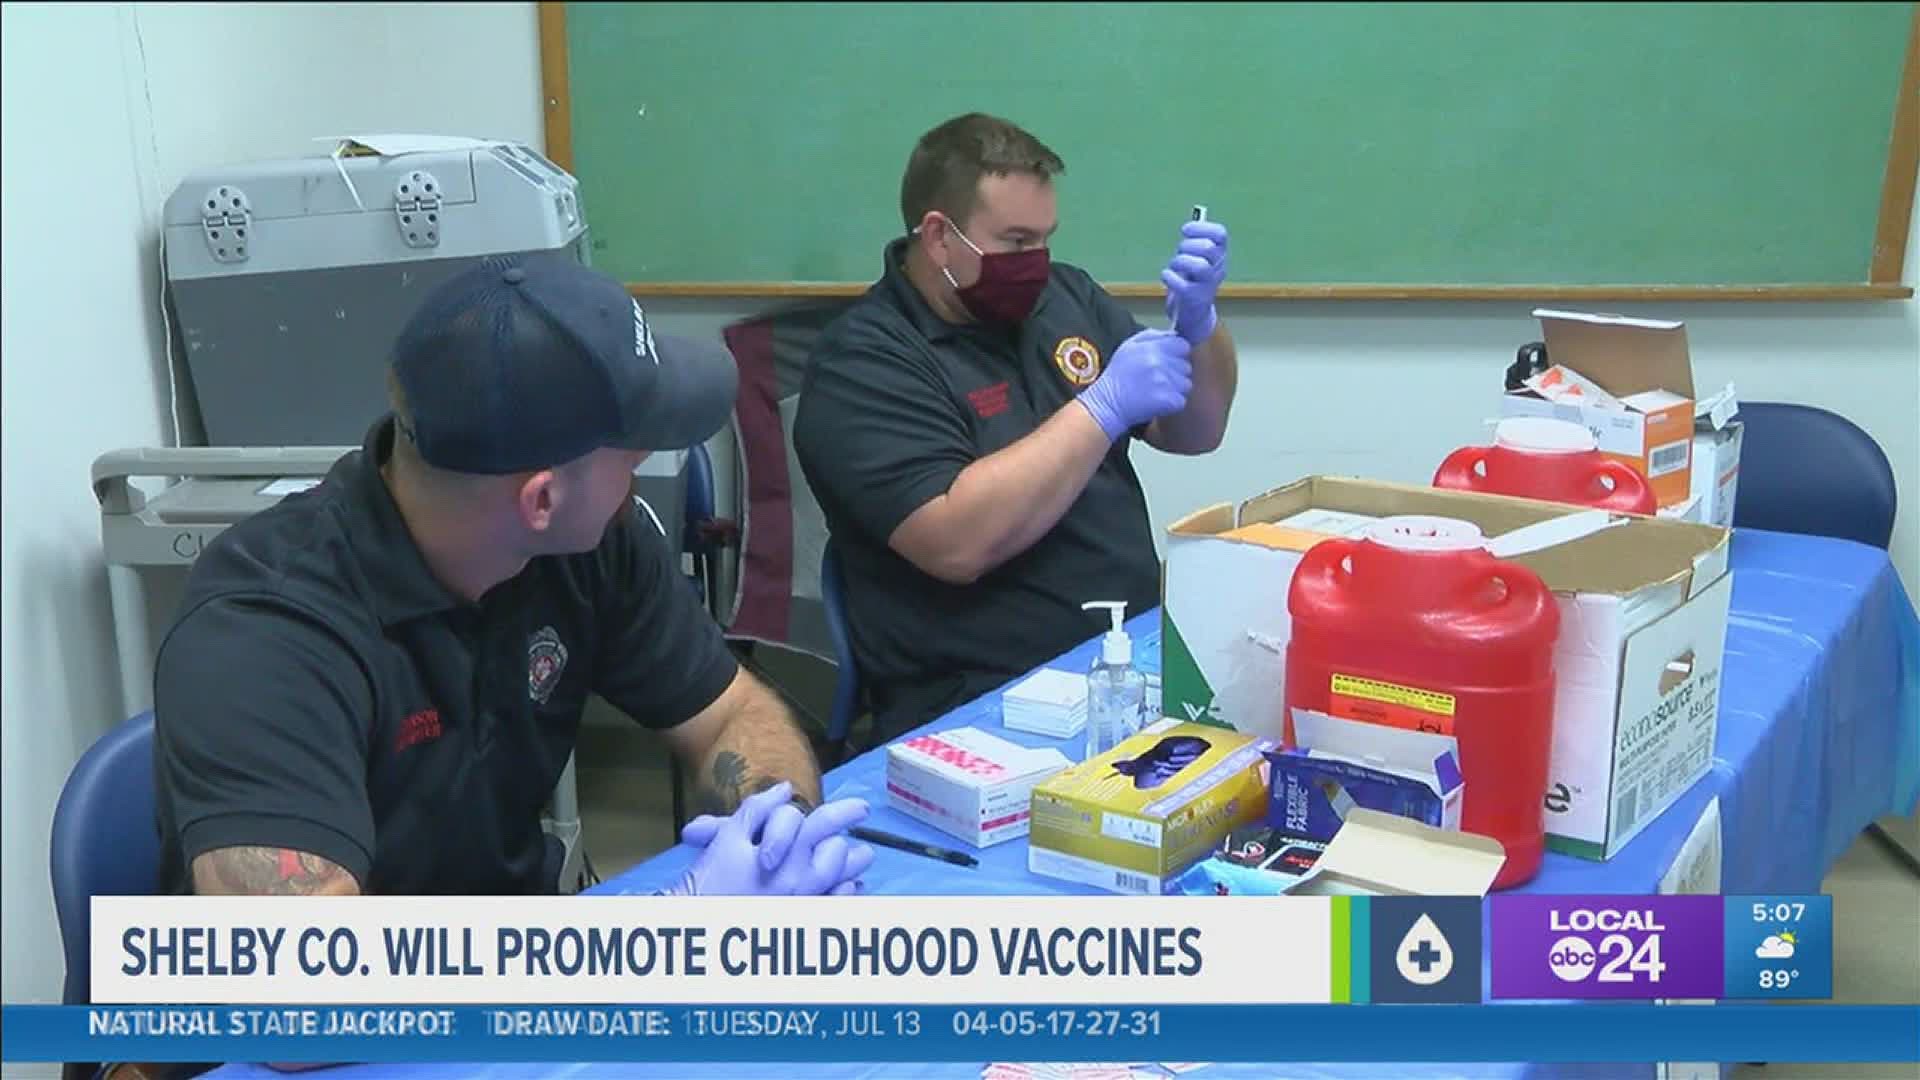 This comes after reports that health officials across the state were instructed to make sure they don't aim coronavirus vaccination information at juveniles.